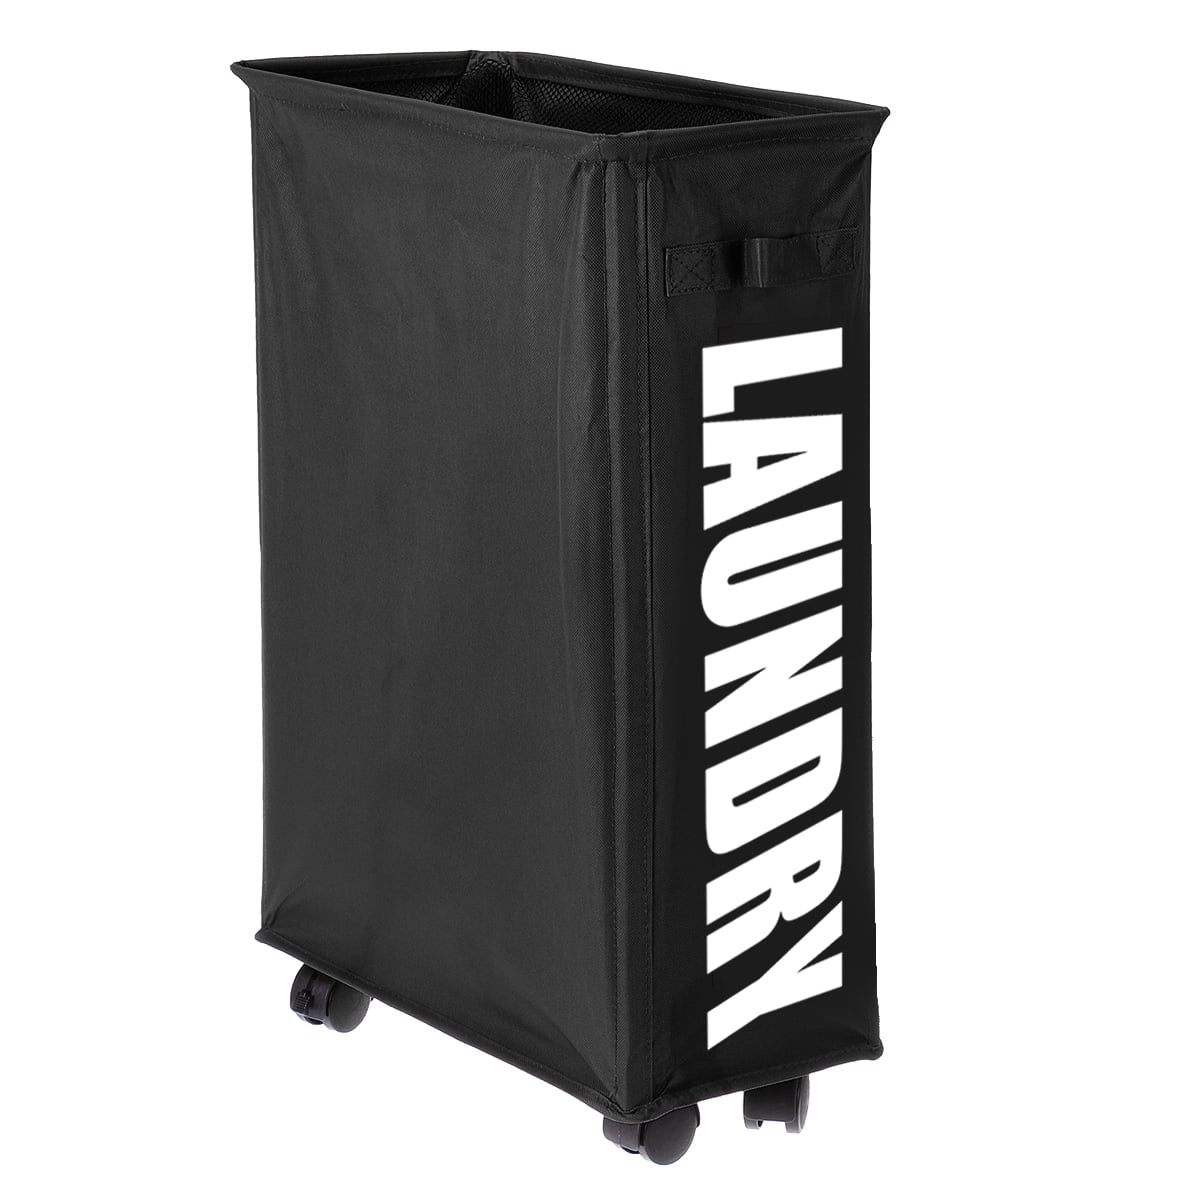 Details about   Laundry Basket Divider Foldable Waterproof Clothes Storage Bag Container Coffee 